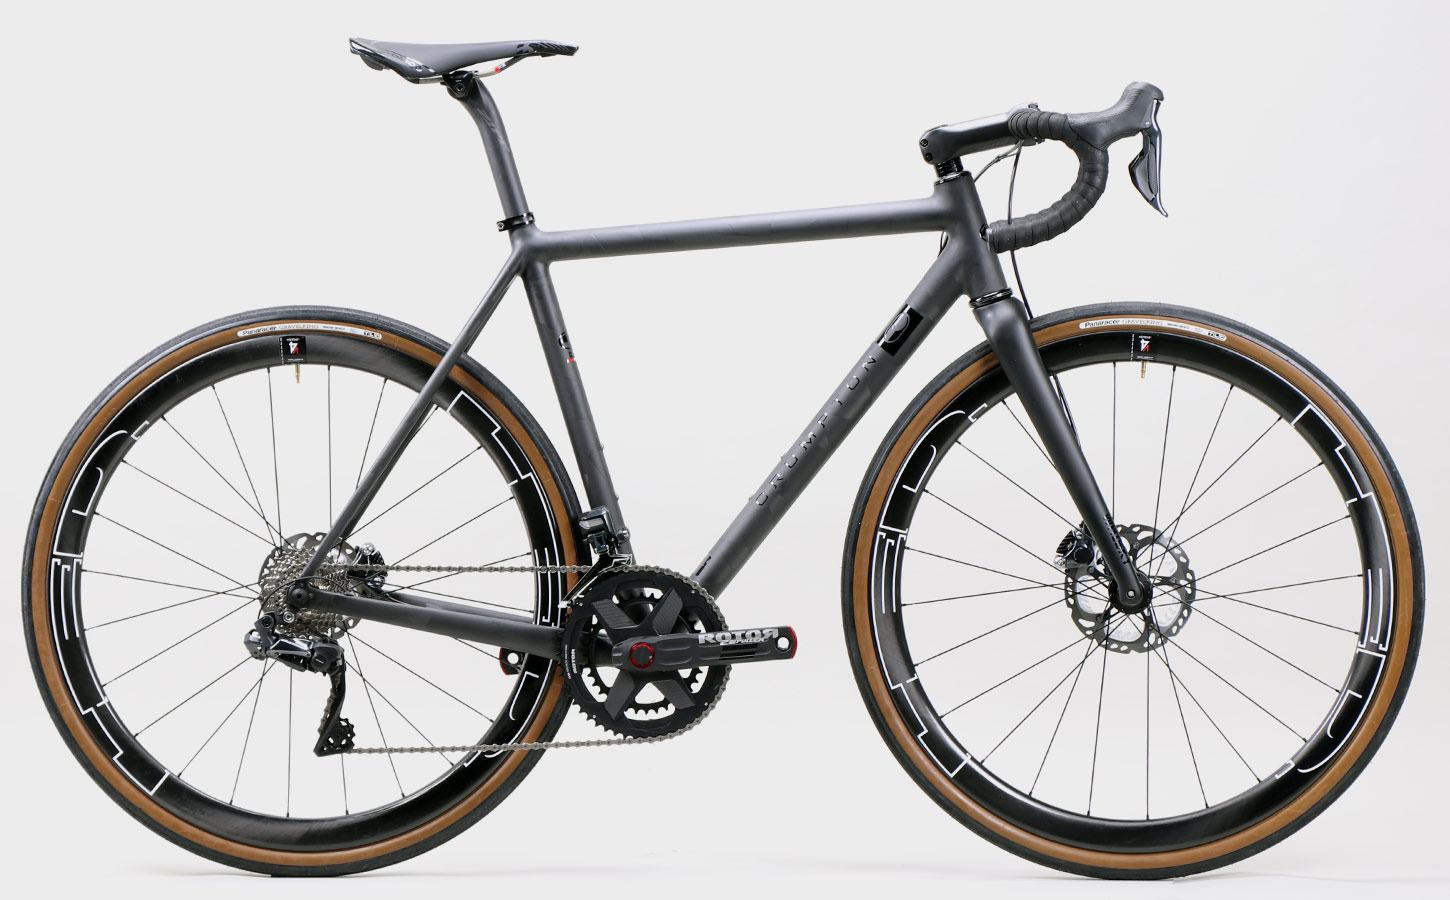 T5 All-Road shown with 700x38 tire size option, Ultegra Di2 with hydraulic discs